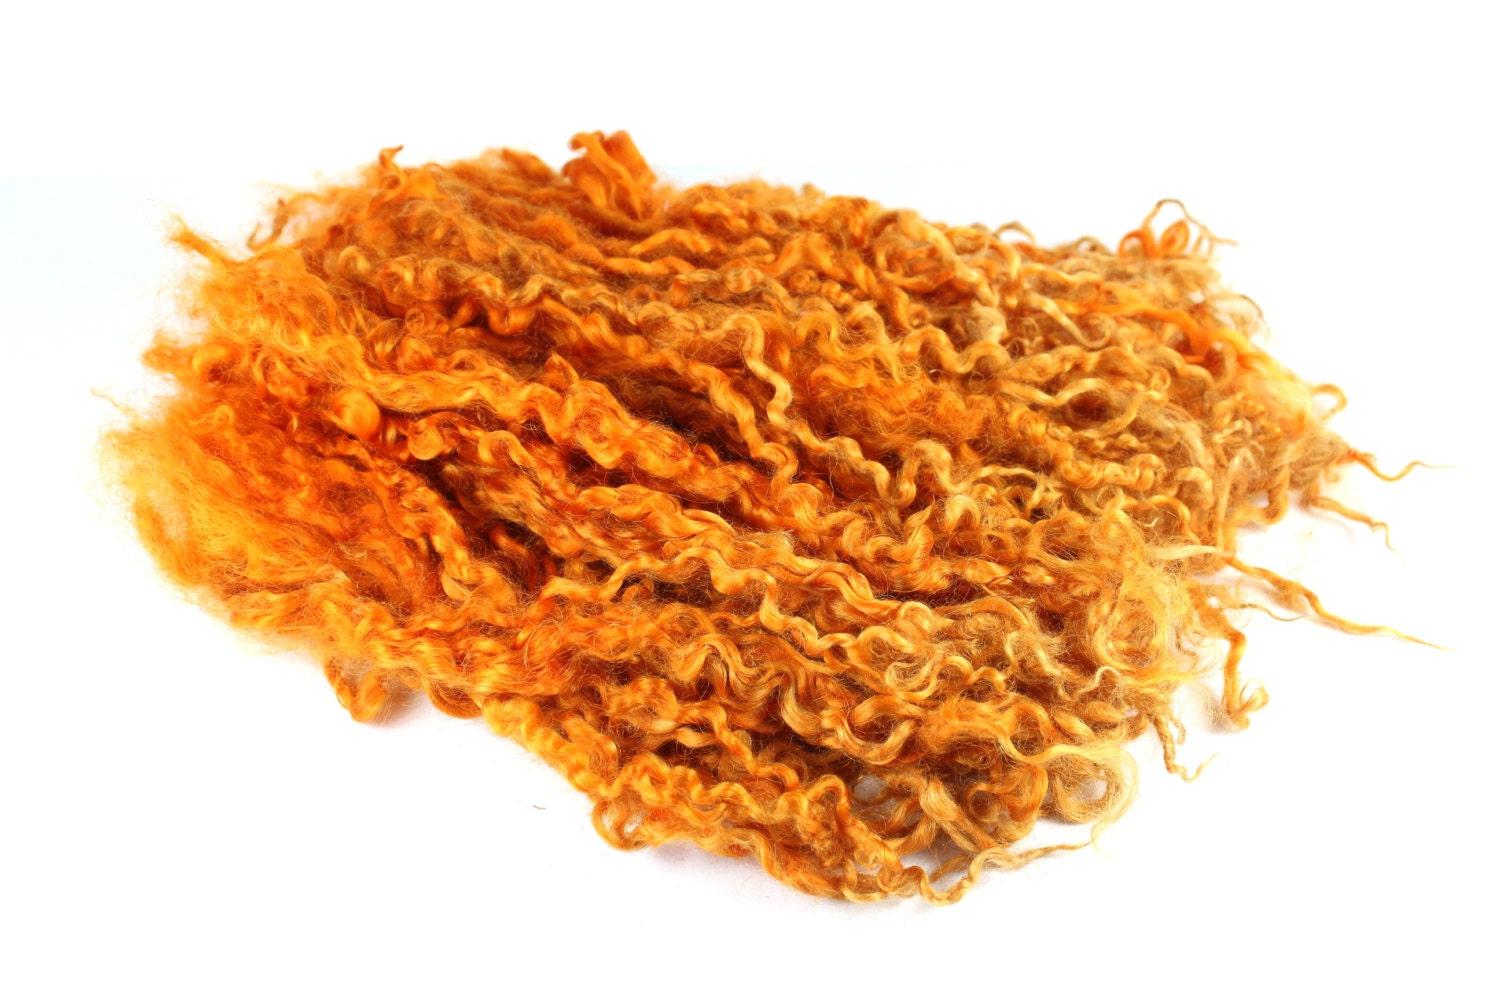 Rust Yellow Orange - Super long Locks curls from Teeswater sheep for Tailspinning, dollmaking, doll hair or felting - single color - SpinningMermaid